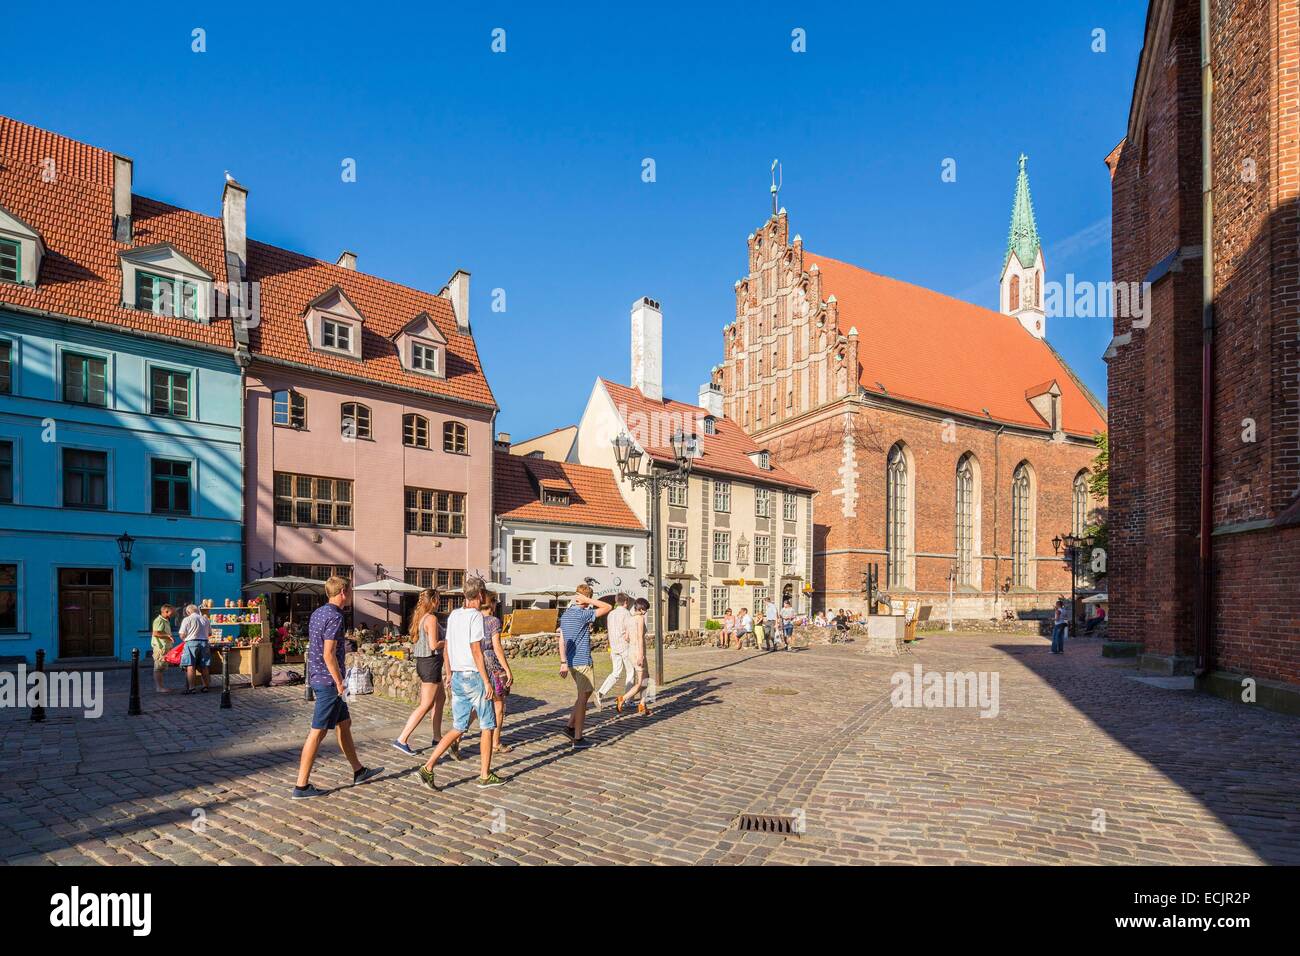 Latvia (Baltic States), Riga, European capital of culture 2014, historical centre listed as World Heritage by UNESCO, old town, street Skarnu and Saint Jhon's church Stock Photo